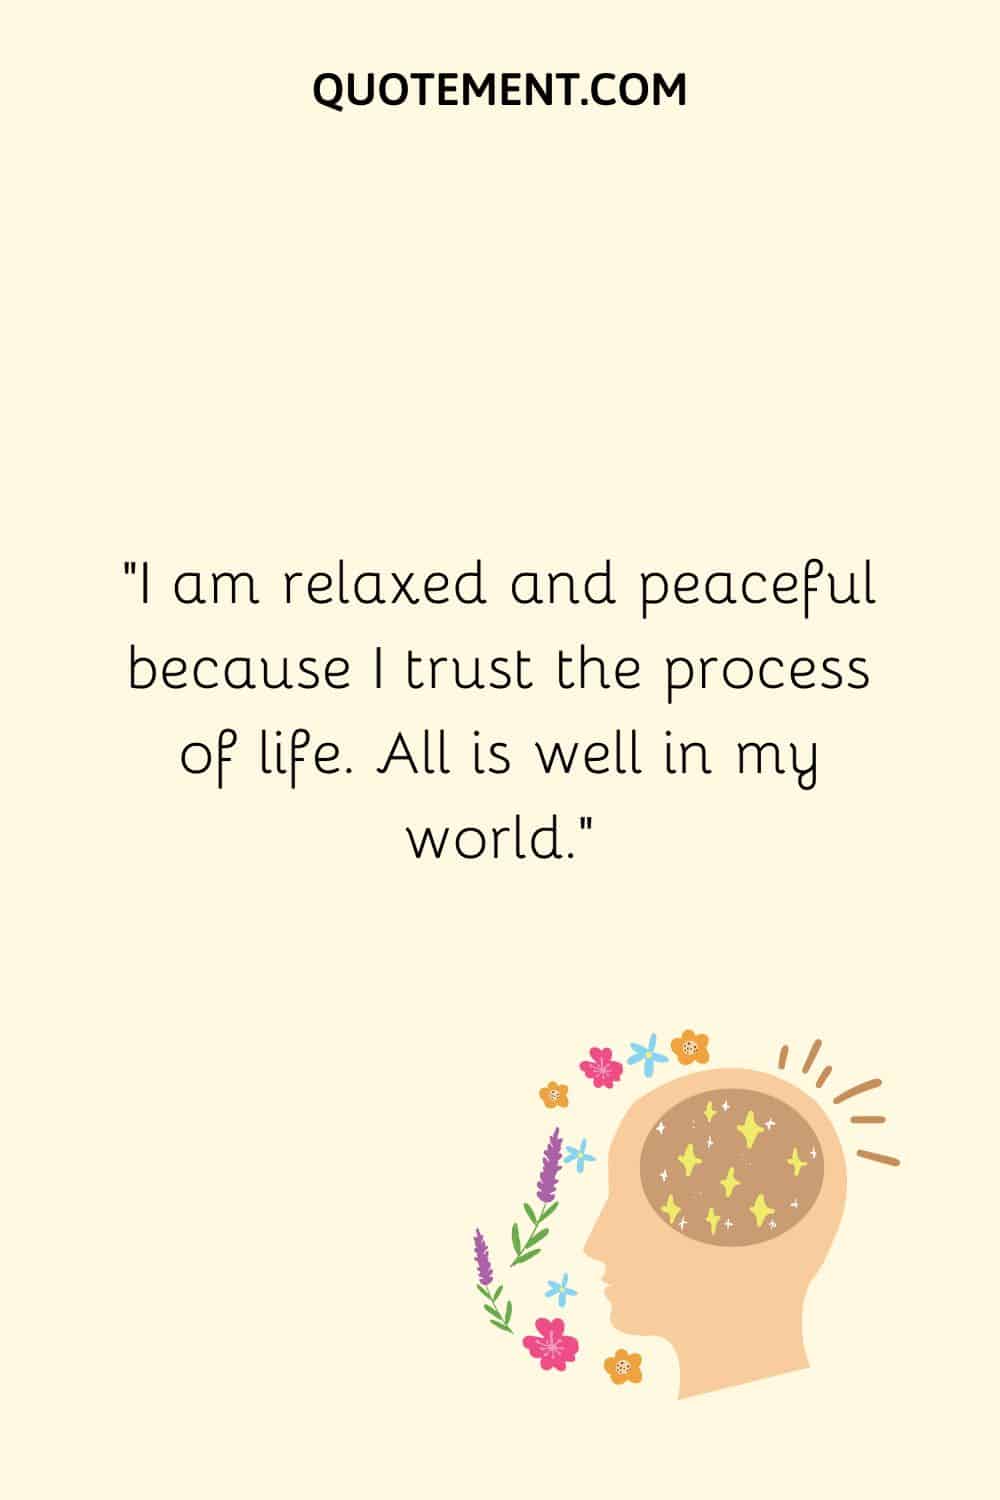 I am relaxed and peaceful because I trust the process of life